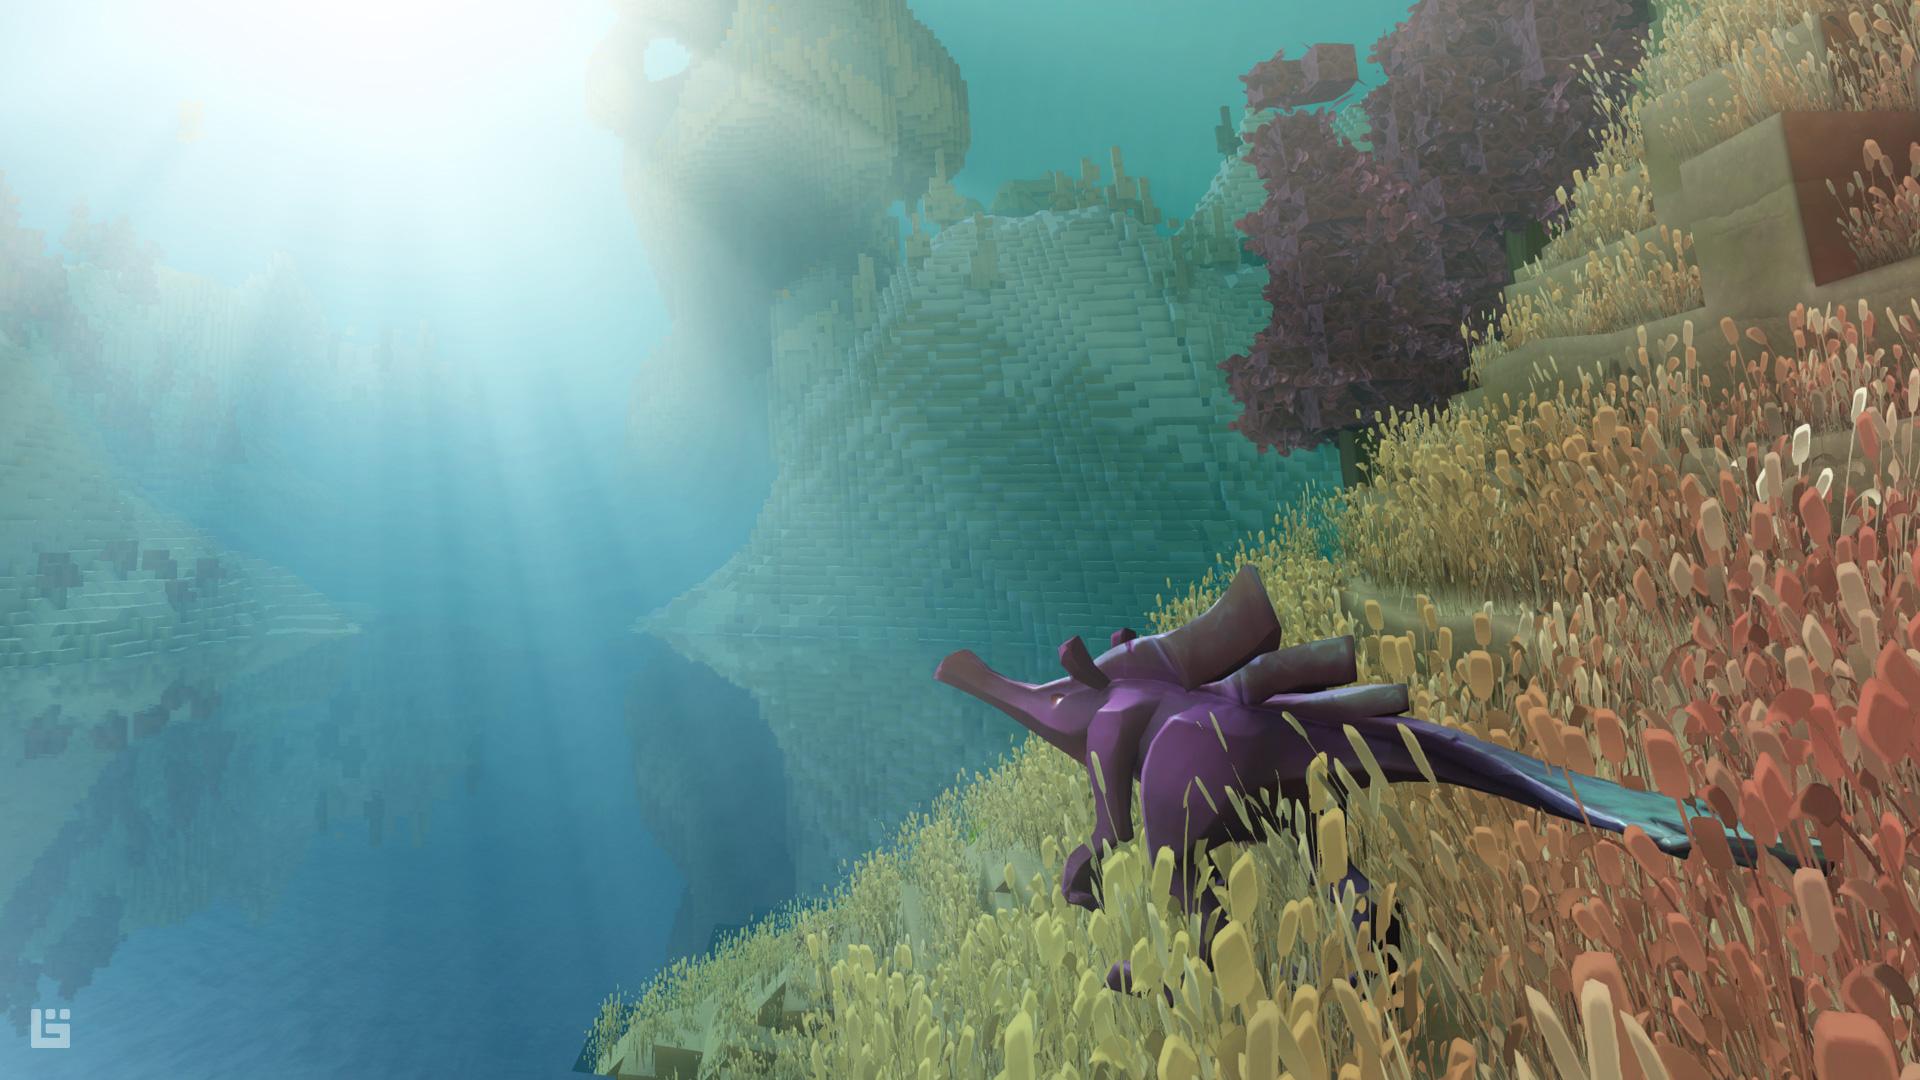 Screenshot №18 from game Boundless